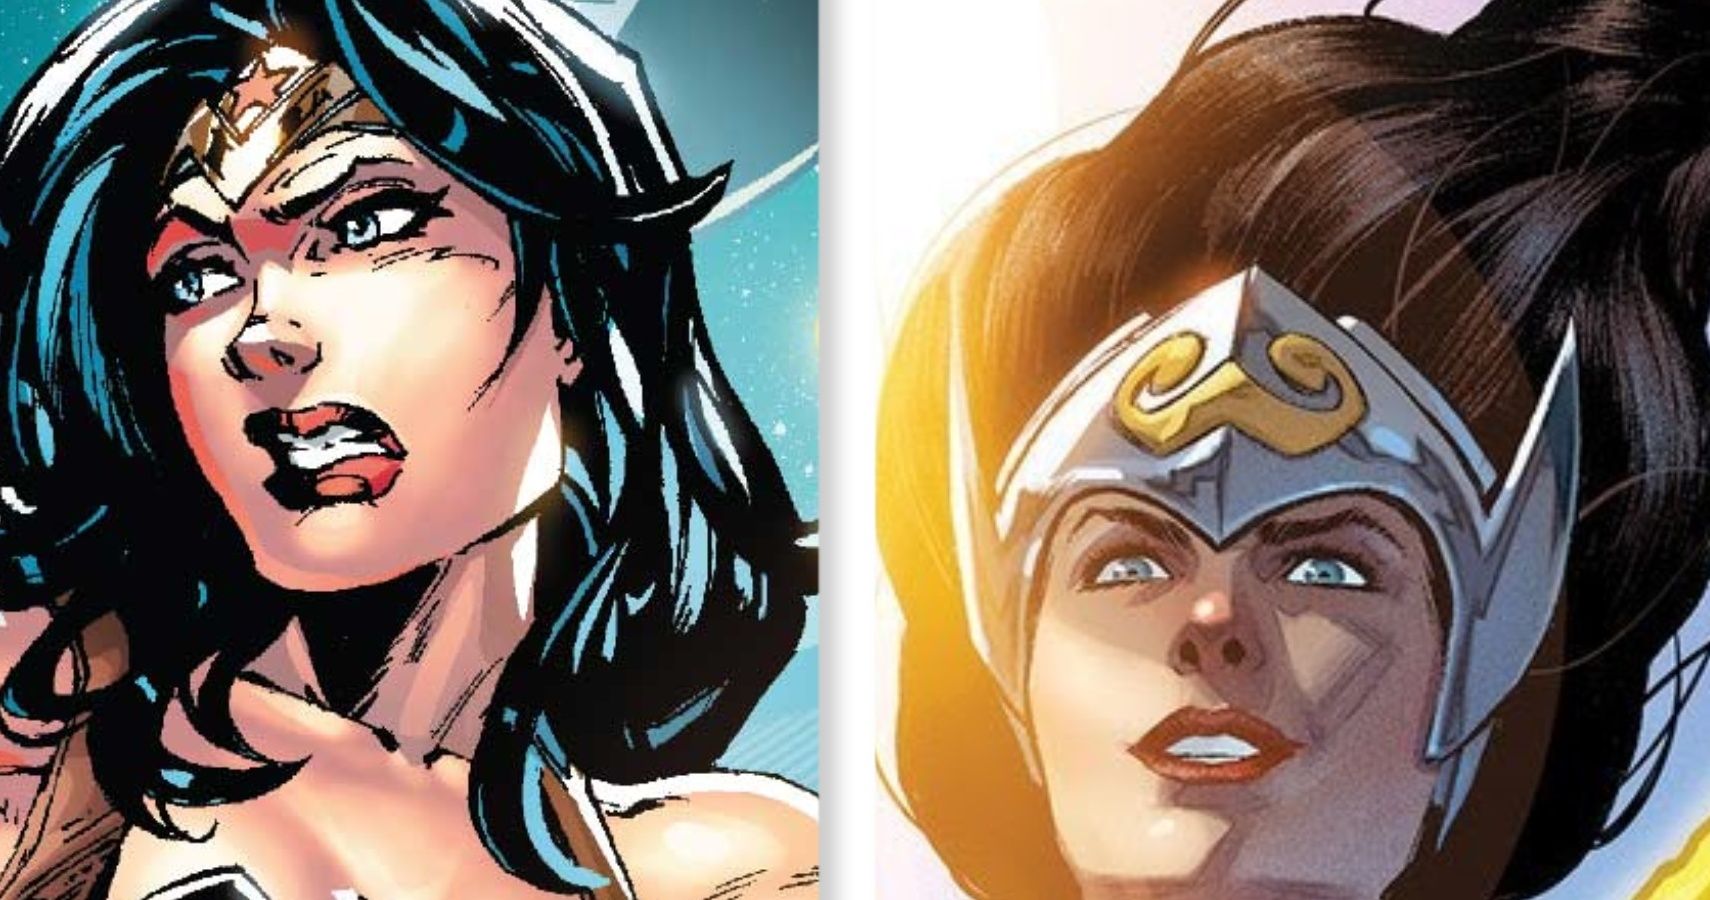 Who would win in a fight between Valkyrie and Wonder Woman? - Quora